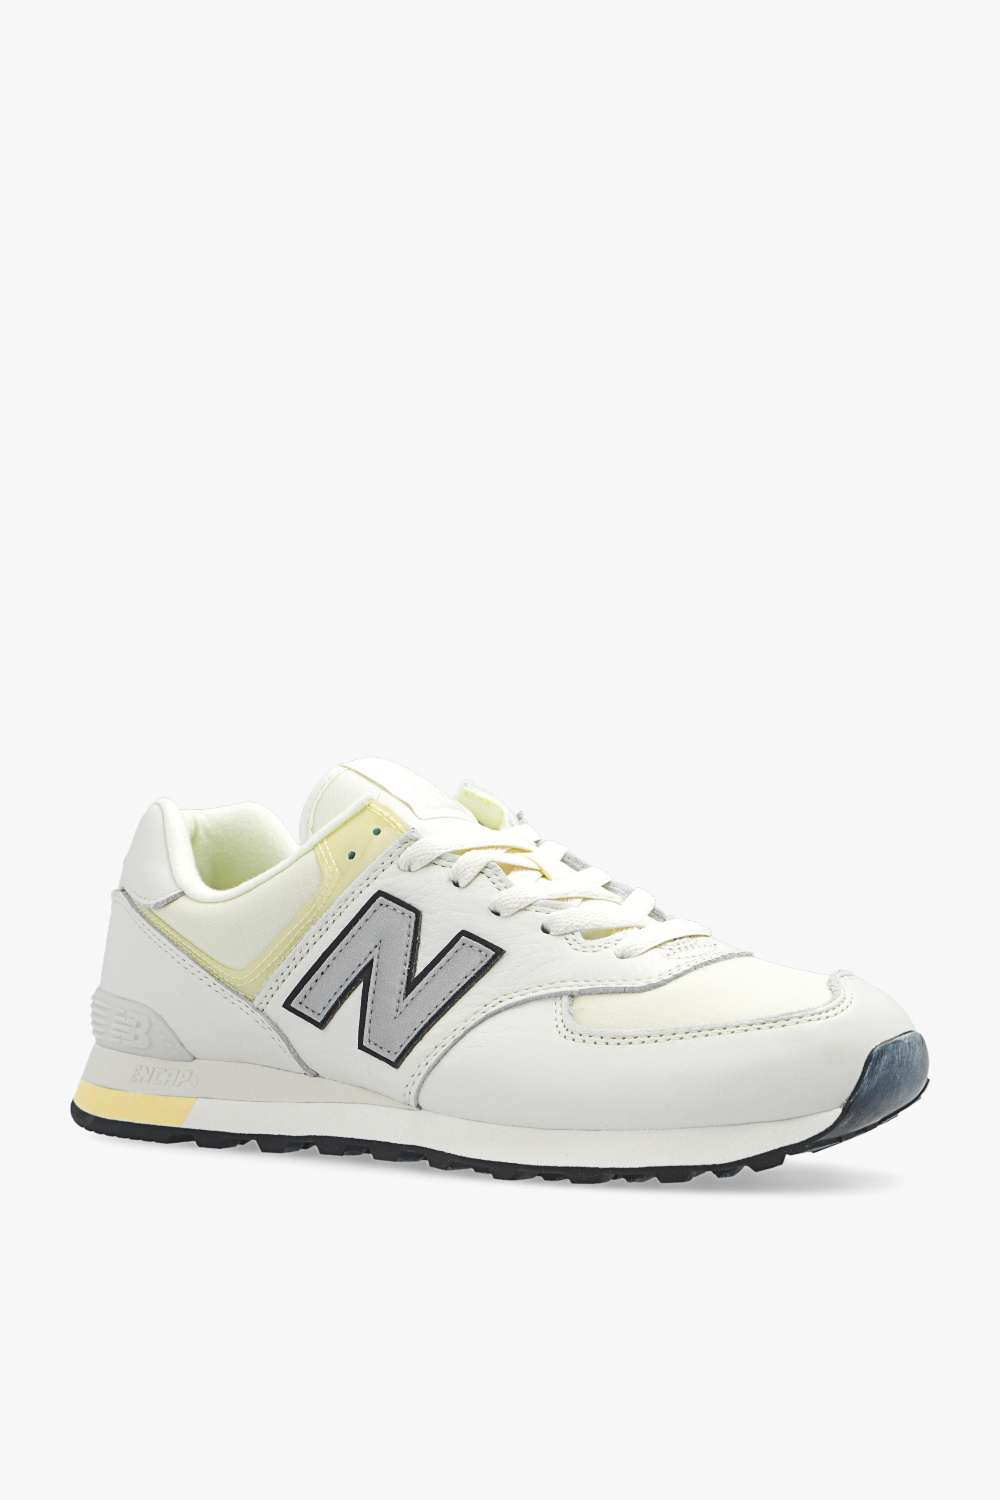 New Balance images of new balance 990 grey green have been released